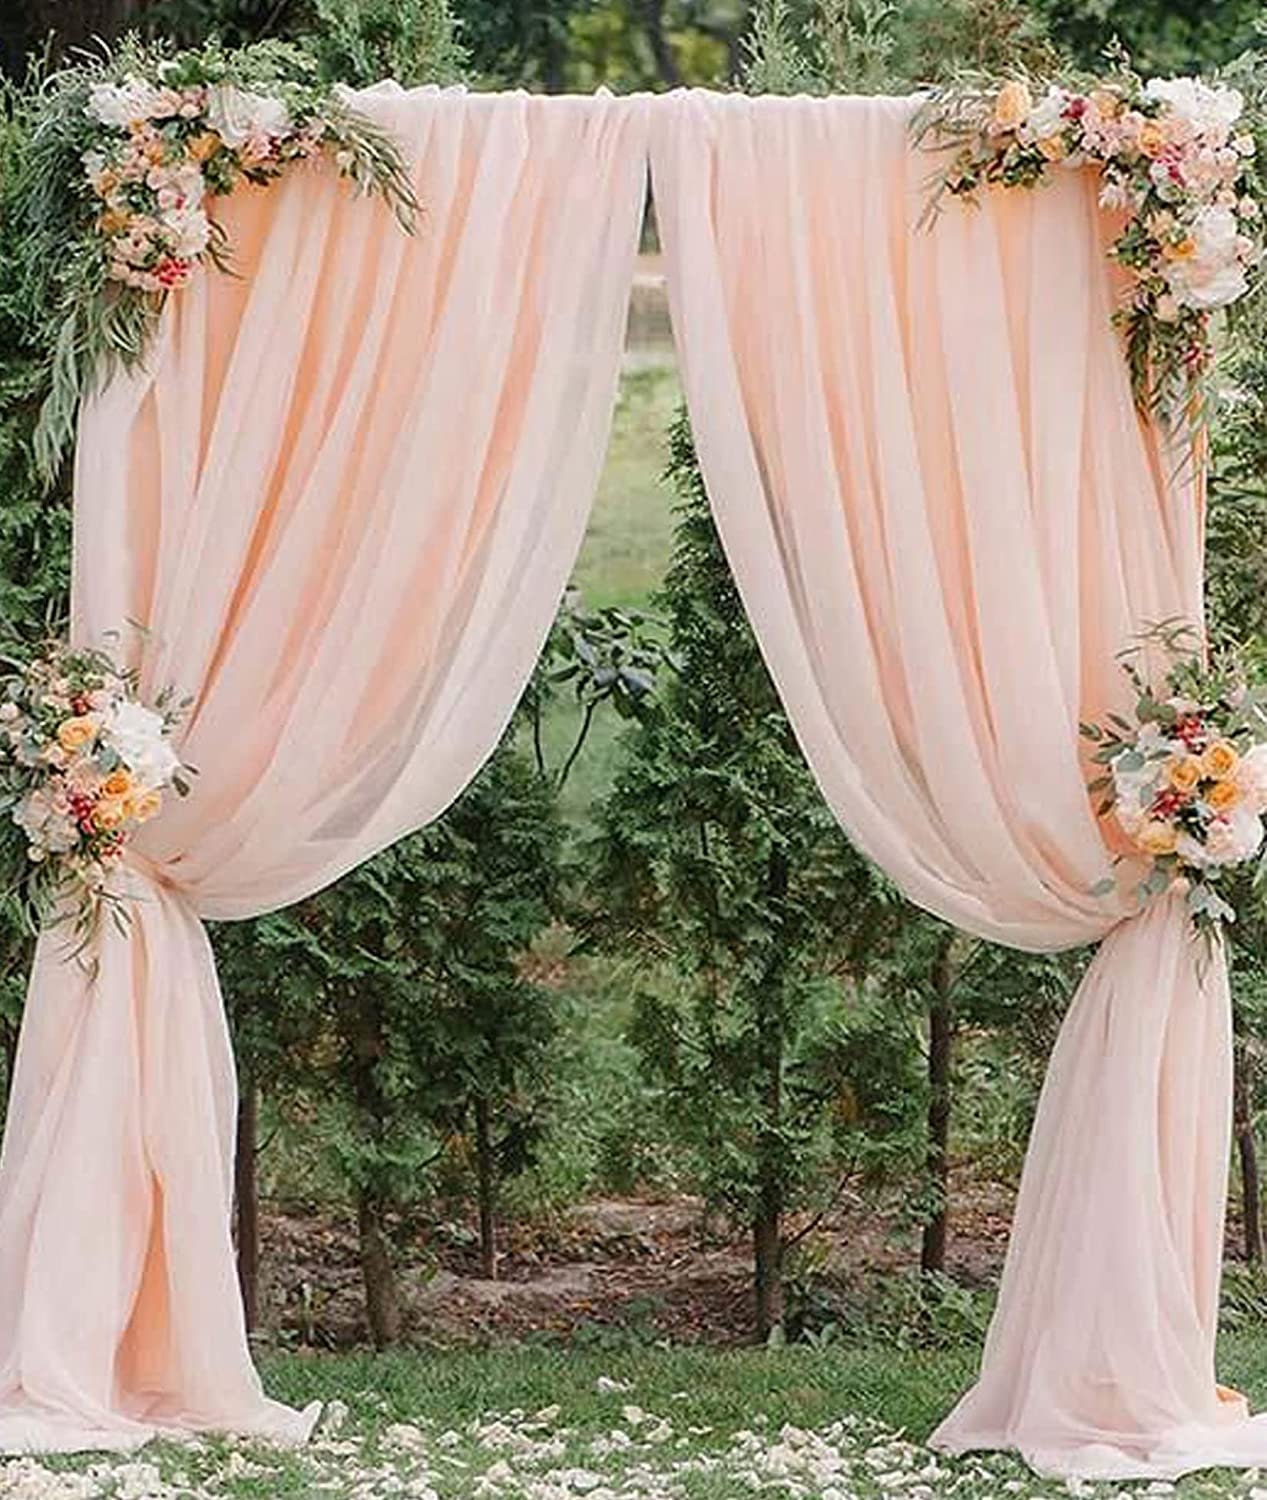 GRAY Wedding Arch Draping Fabric 21 Ft by 29 2 Panels Chiffon Fabric  Drapery Party Ceiling Drapes Archway Drapes for Wedding Sheer -  Denmark